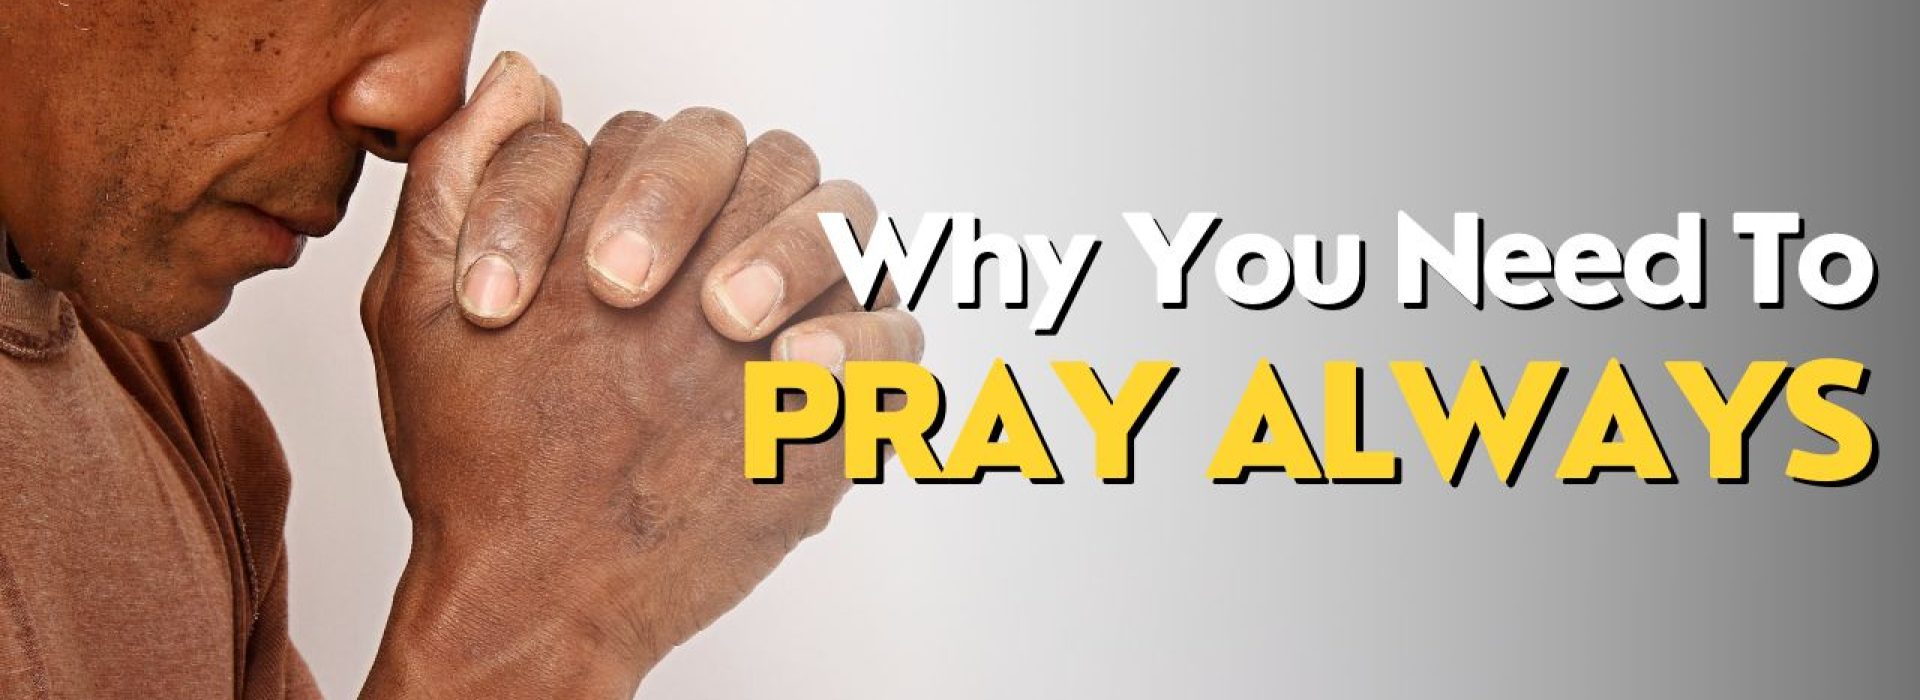 Why You Need To Pray Always